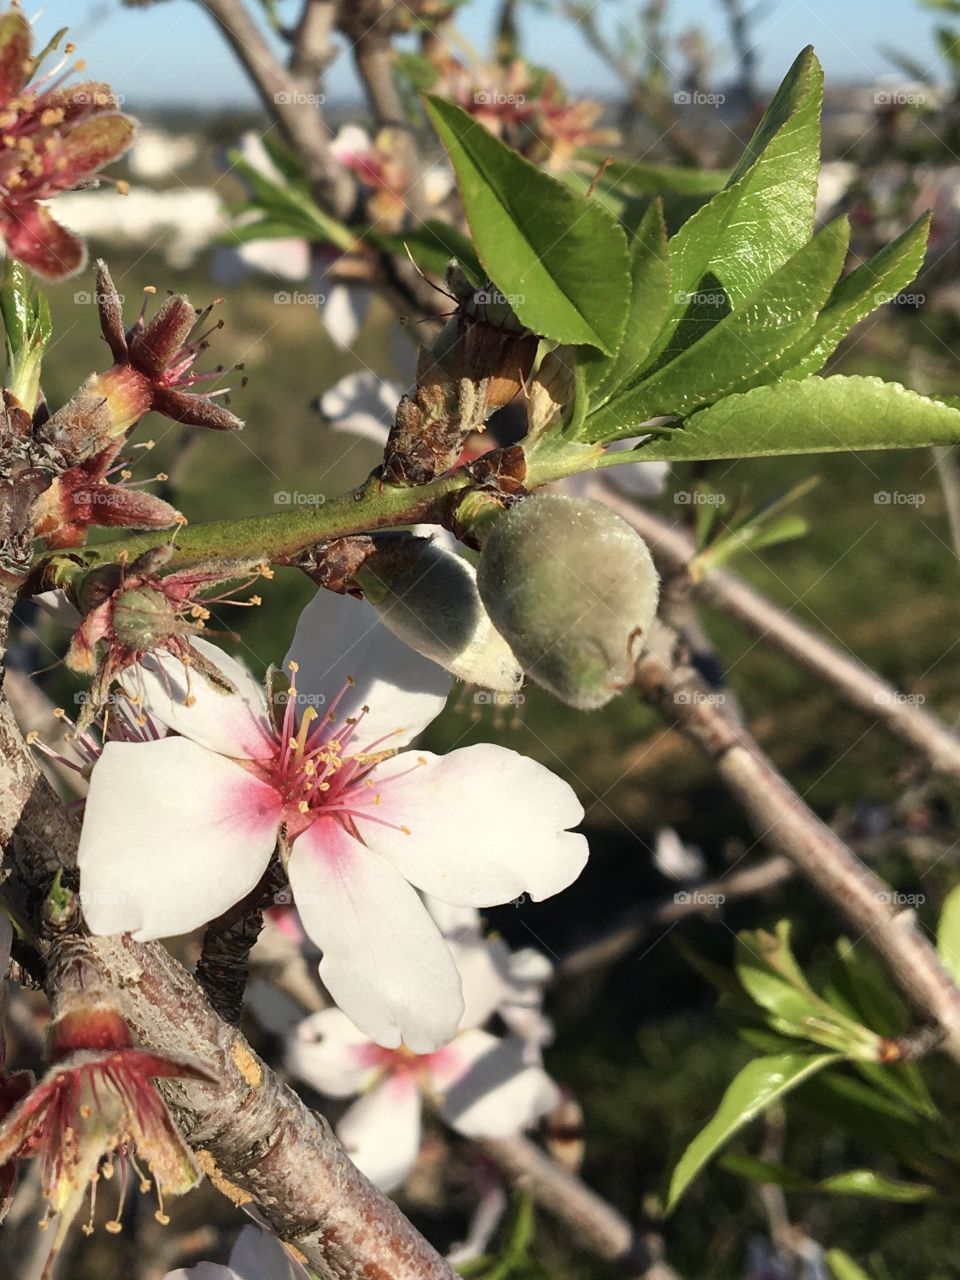 Flowers and new fruit on almond tree